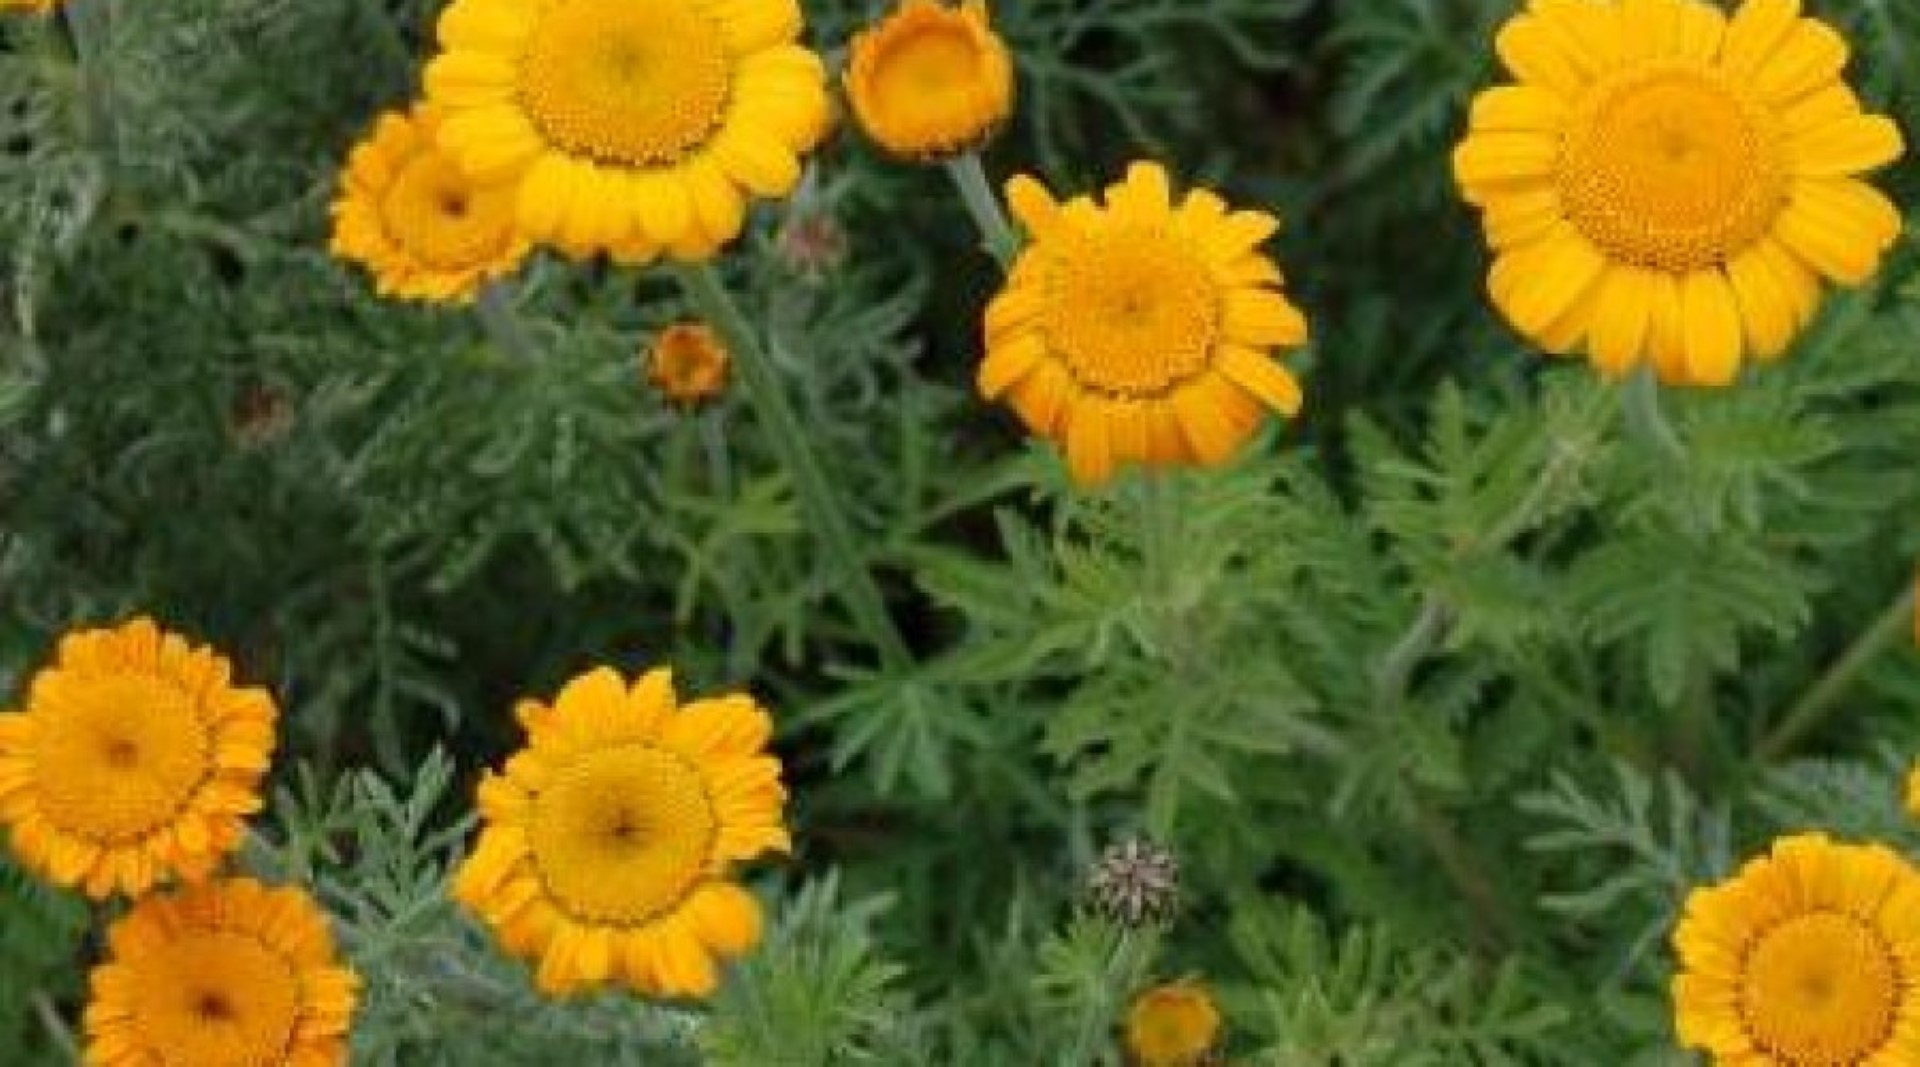 Anthemis-Sancti-Johannis-(Dyer’s Chamomile). Scented Clump Forming Deciduous Perennial With Daisy Like Orange Flowers During Summer. Grow In Sandy Well Drained Soil In Full Sun 60-90cm High X 60cm (Large)